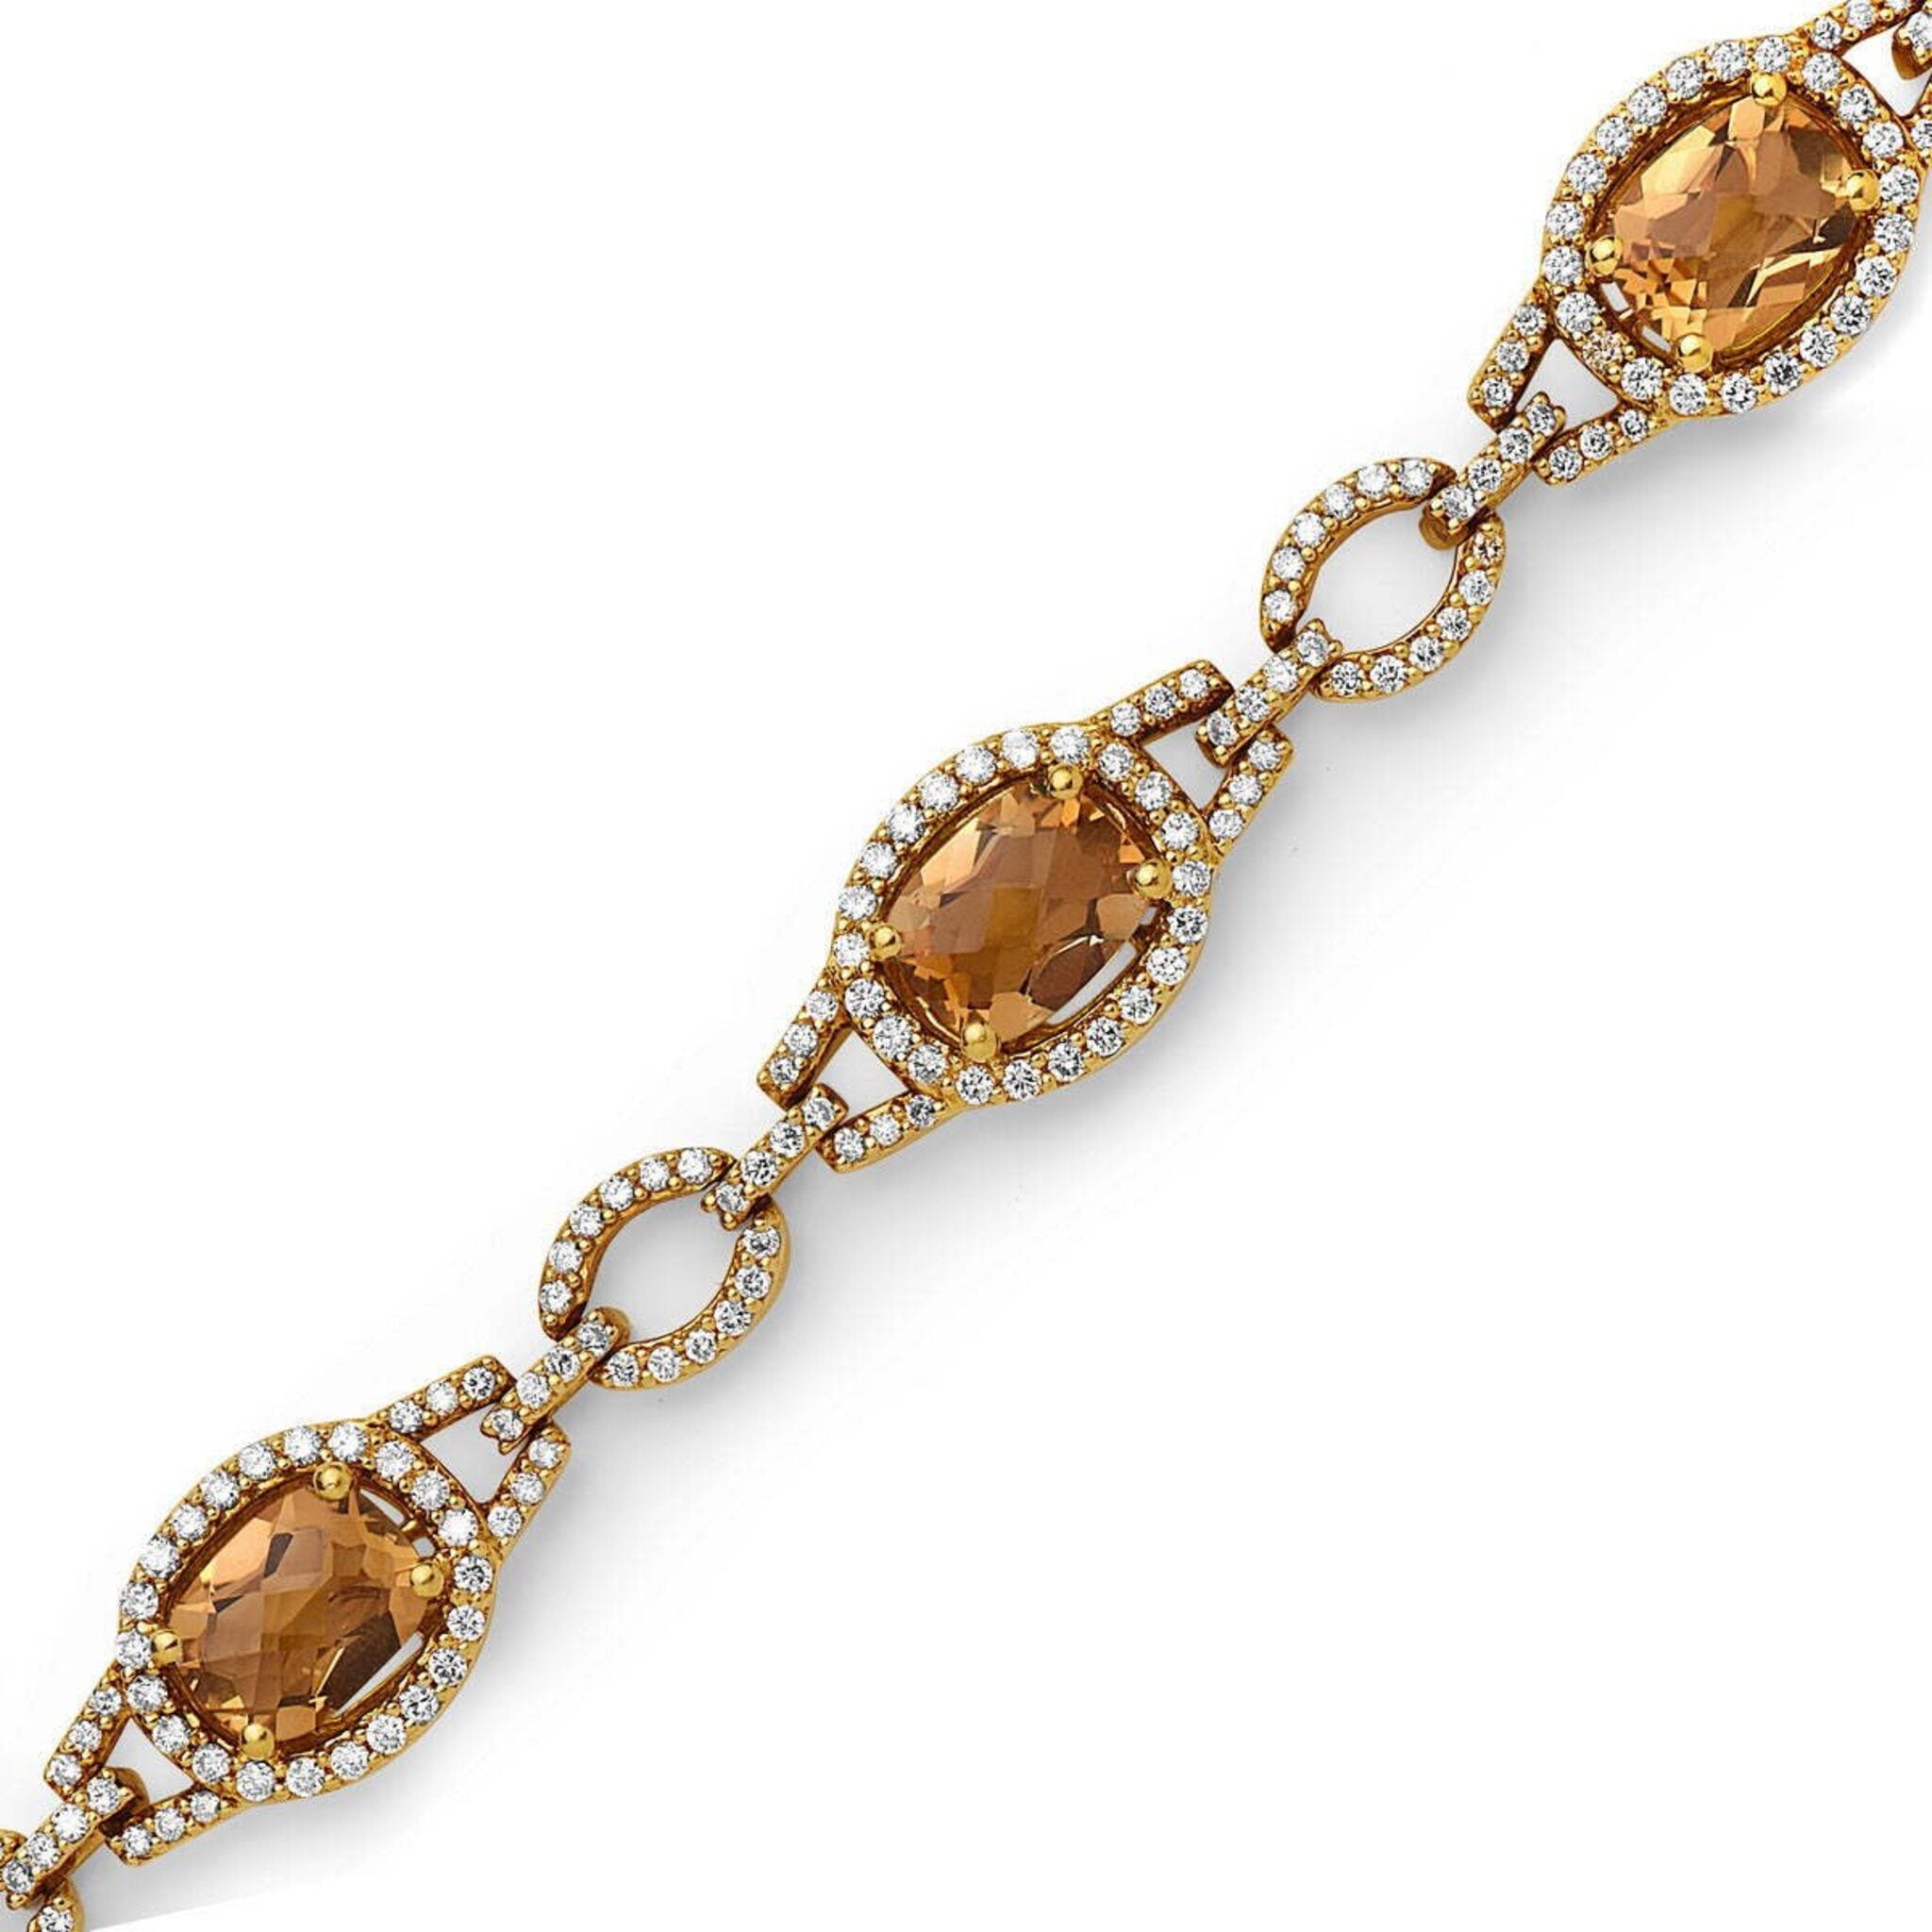 Charles Krypell - Pastel Diamond Bridle Oval Bracelet - Citrine and Yellow Gold